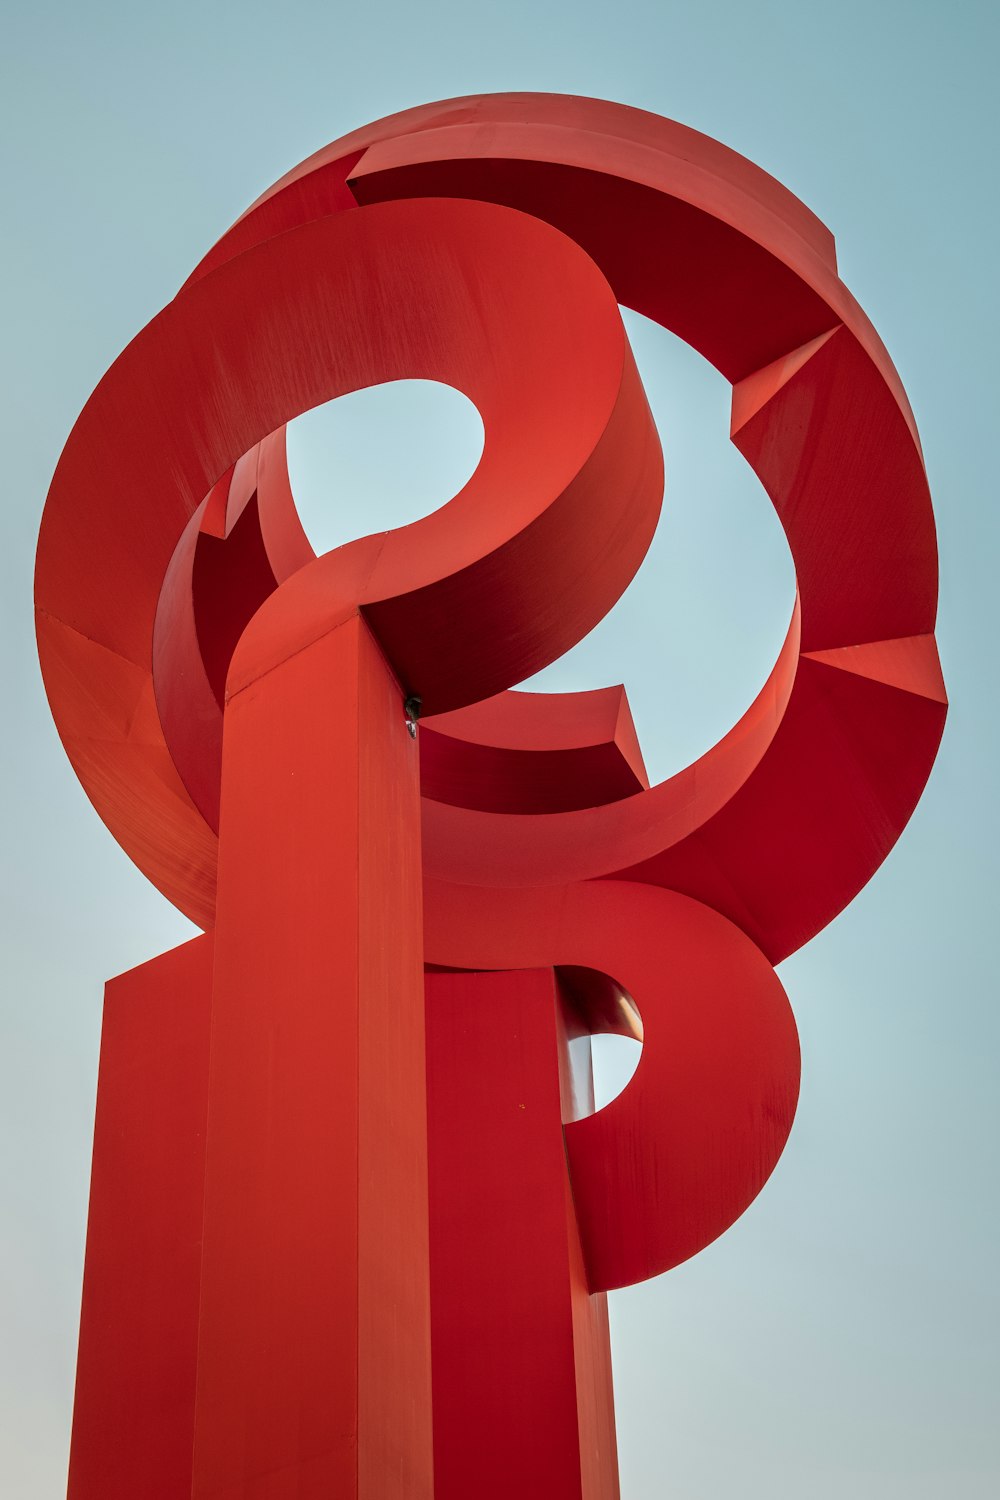 red and white spiral illustration